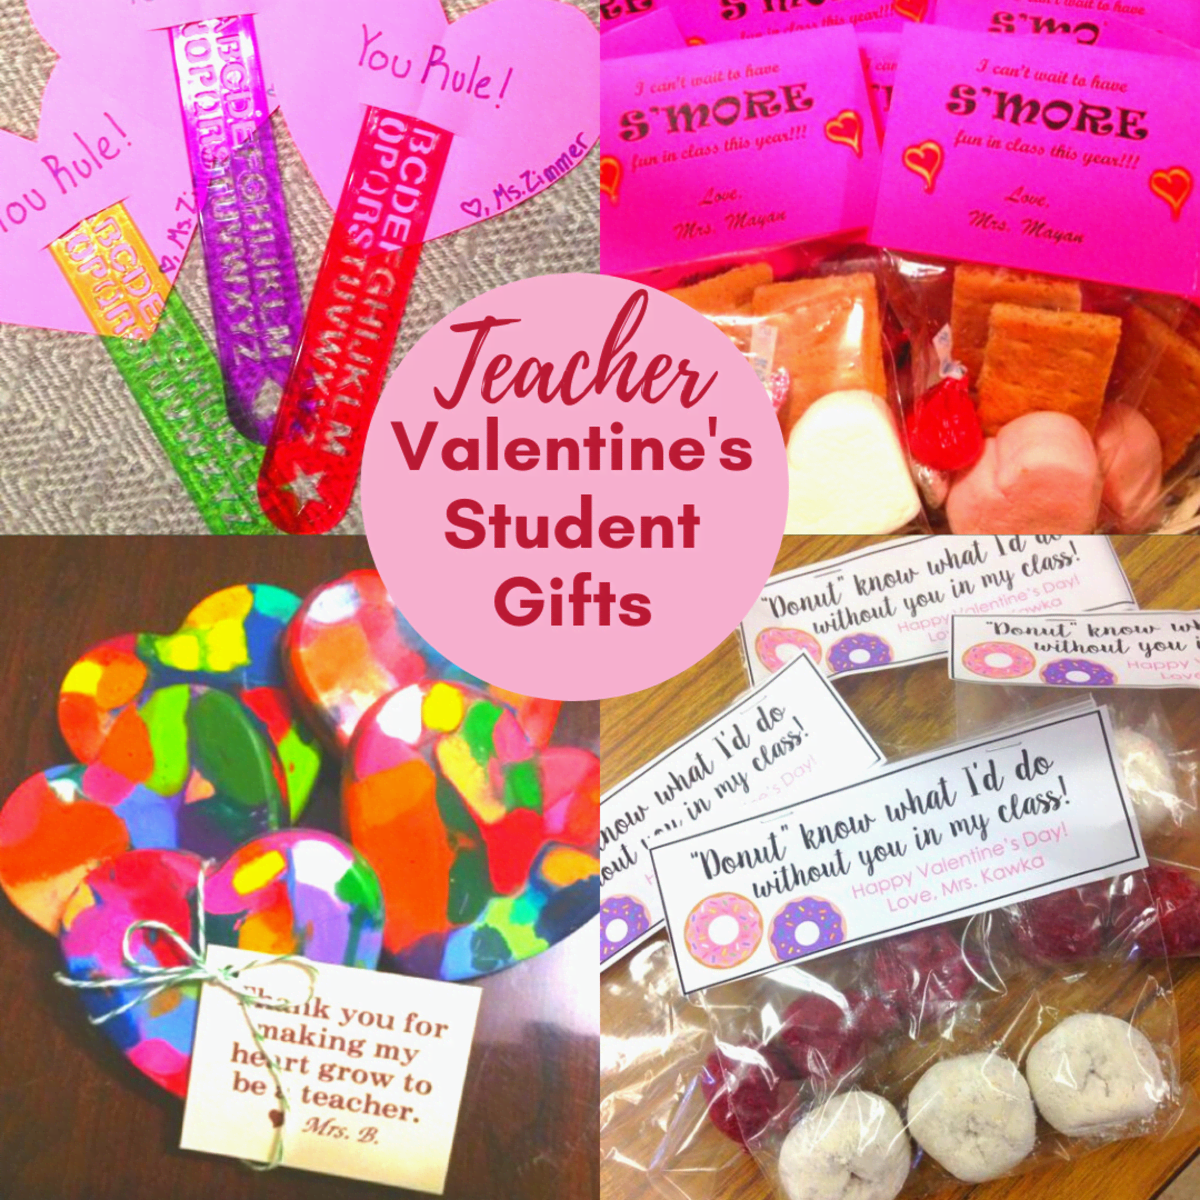 Easy Valentines Kids Can Make for Their Teachers